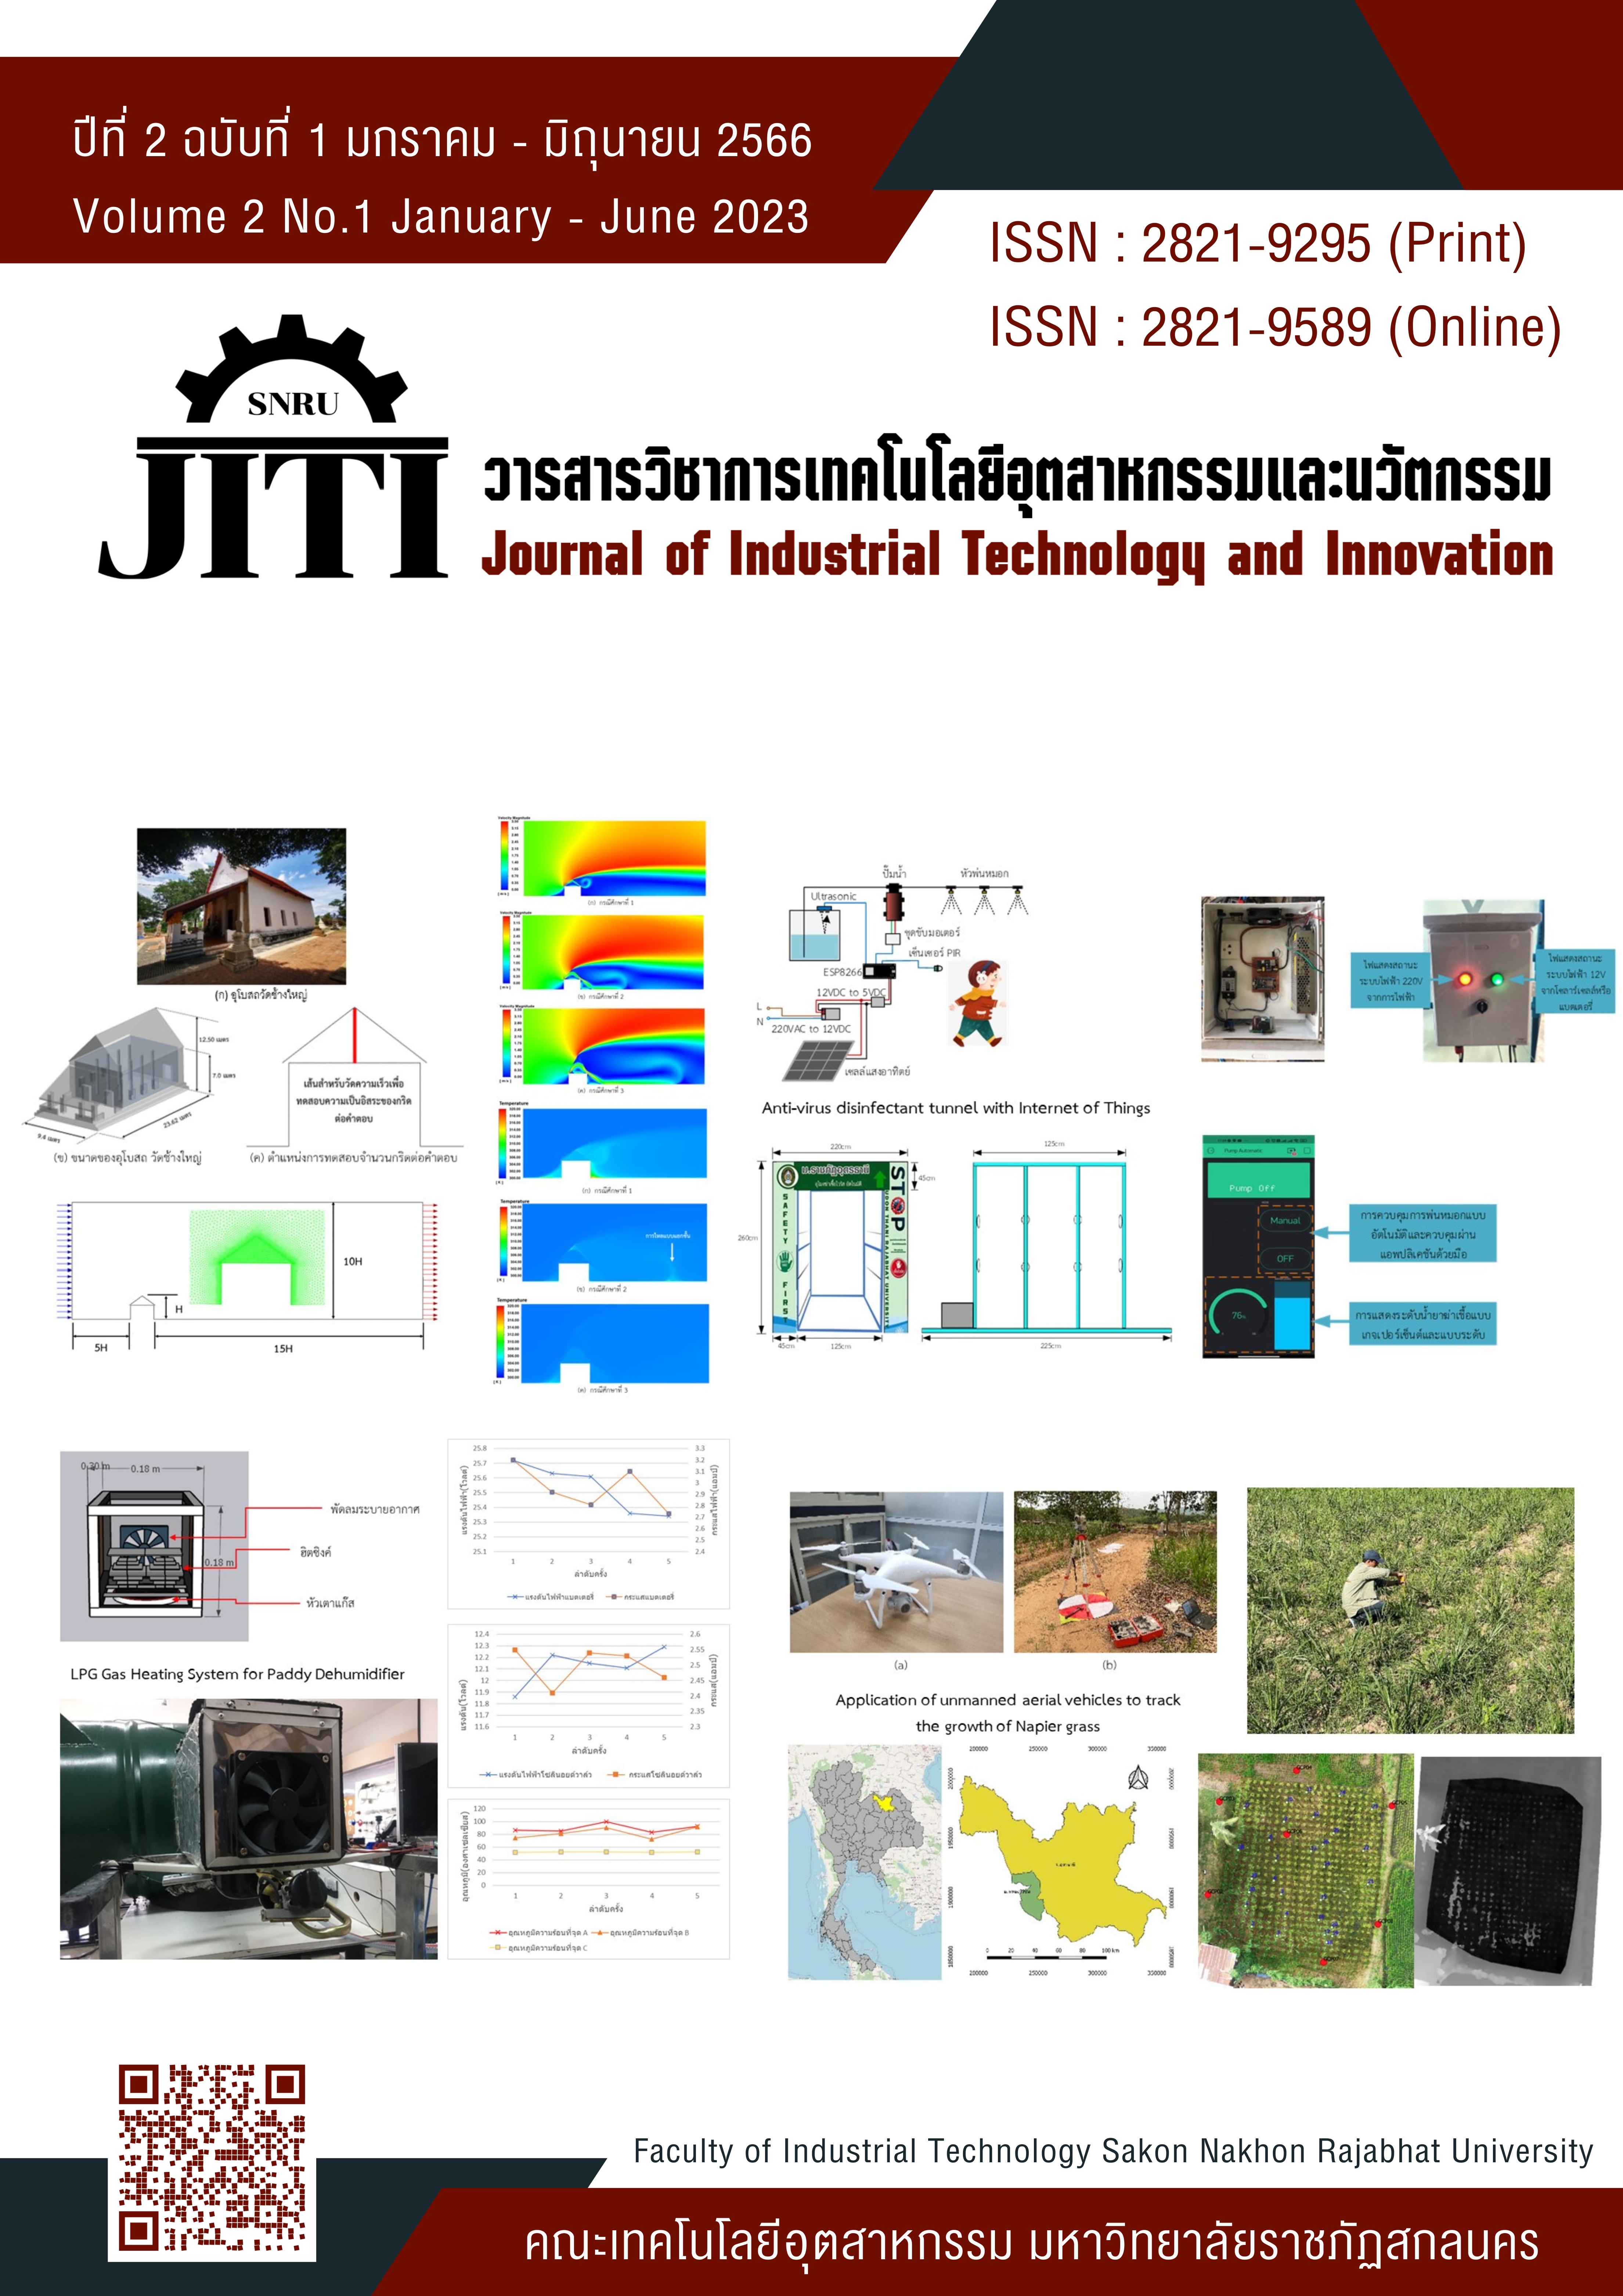 					View Vol. 2 No. 1 (2023): Journal of Industrial Technology and Innovation (January - June 2023)
				